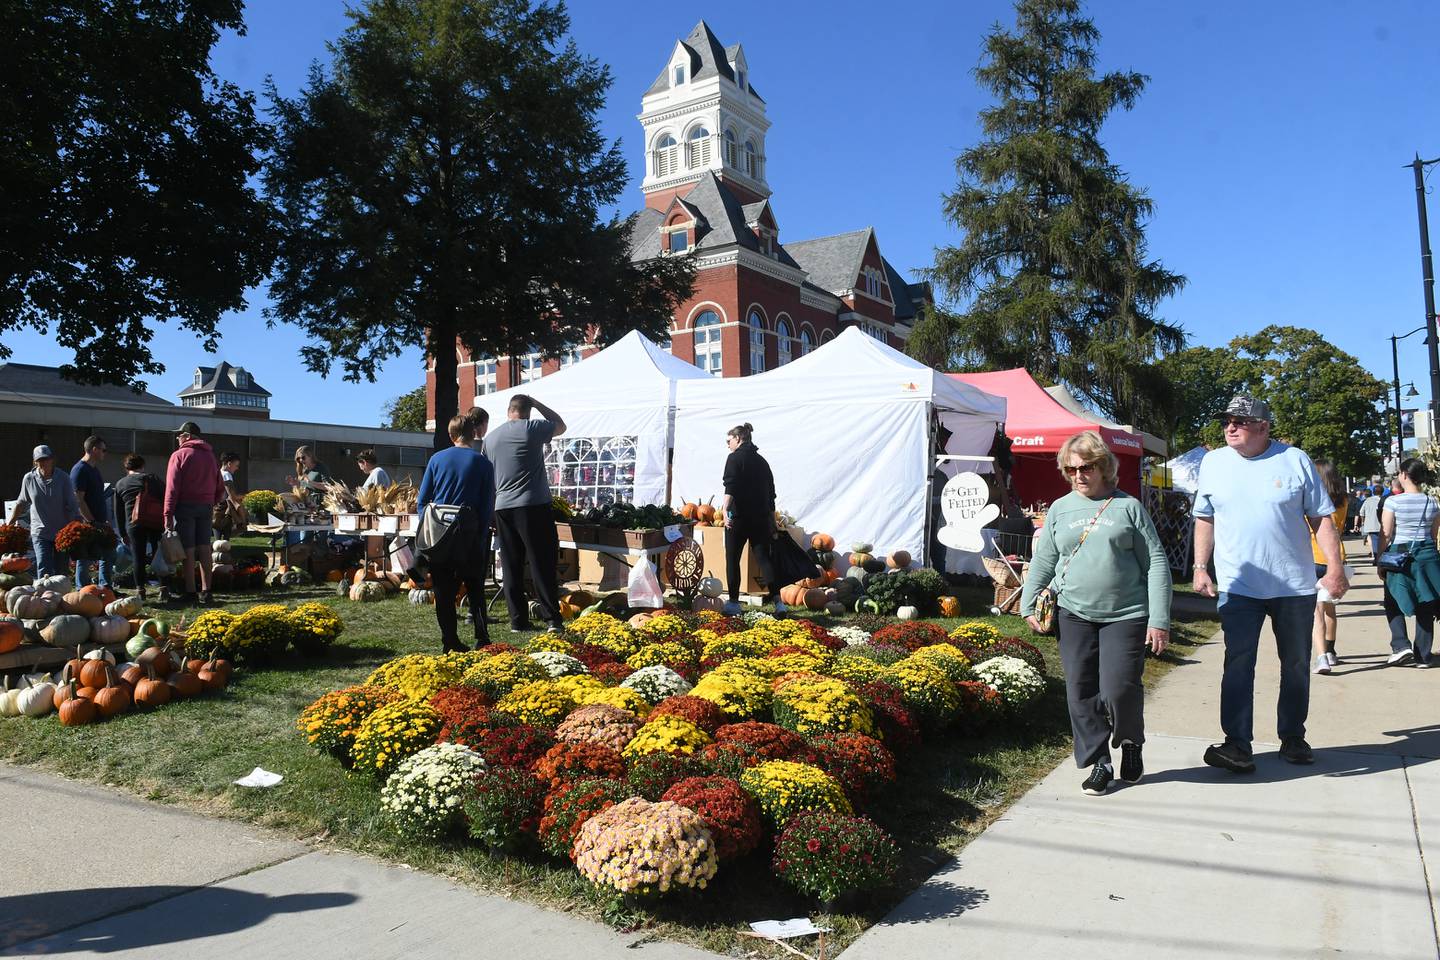 The weather was perfect for visitors at Oregon's Autumn on Parade festival in downtown Oregon on Saturday. The event continues on Sunday with its craft fair/farmers' market, a Fun Zone and petting zoo for kids, the Olde English Faire at Stronghold, and the Harvest Time Parade,